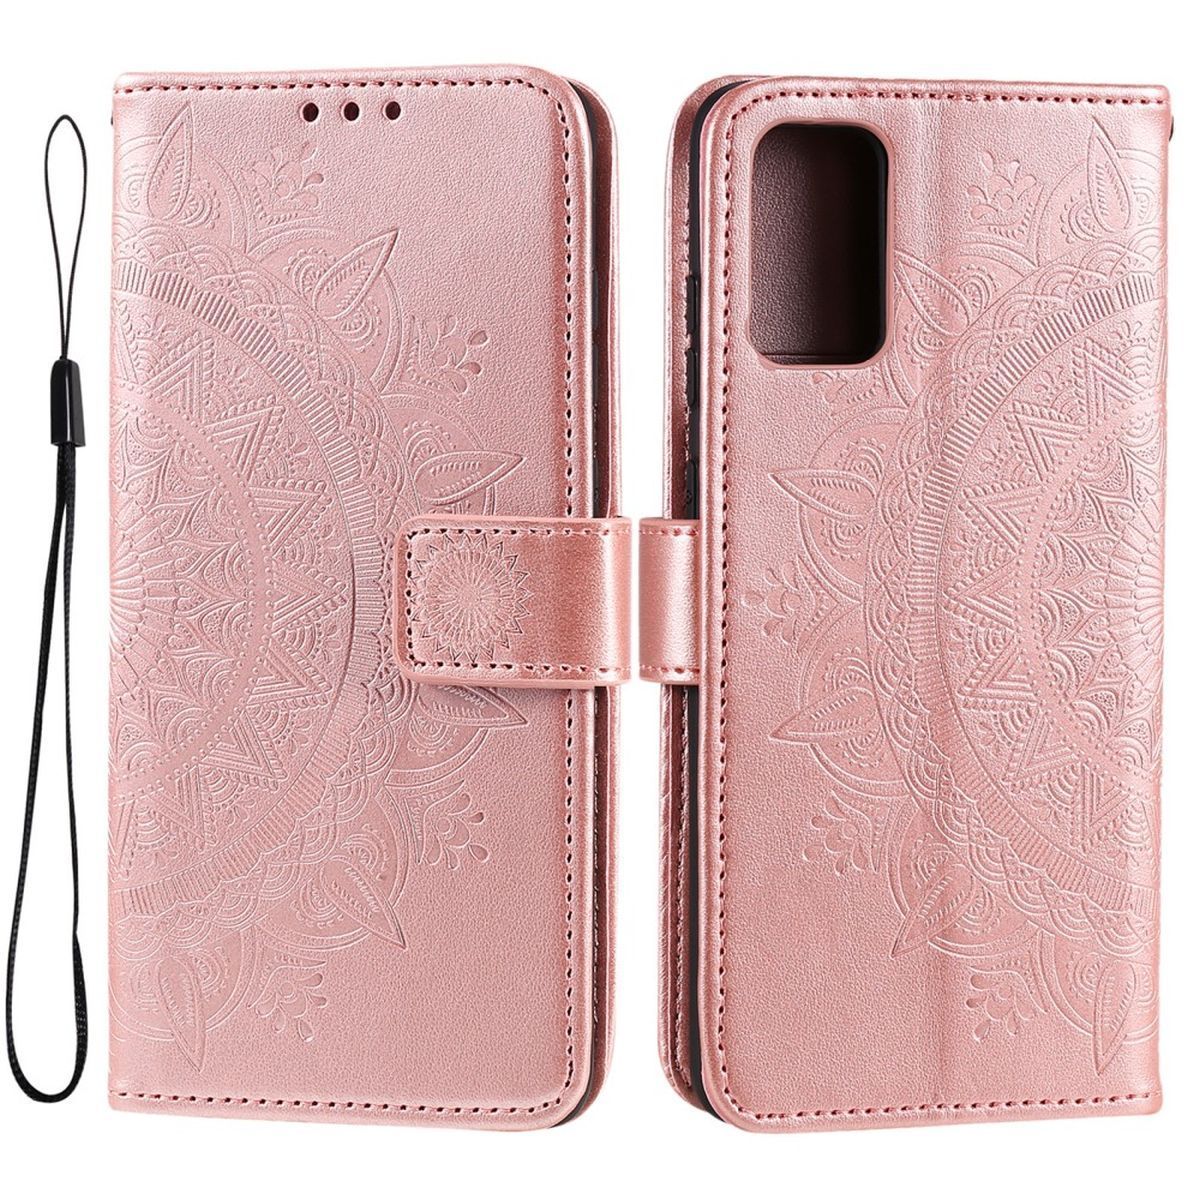 COVERKINGZ Klapphülle mit Mandala Muster, 5G, Galaxy Samsung, Bookcover, Rosegold M23